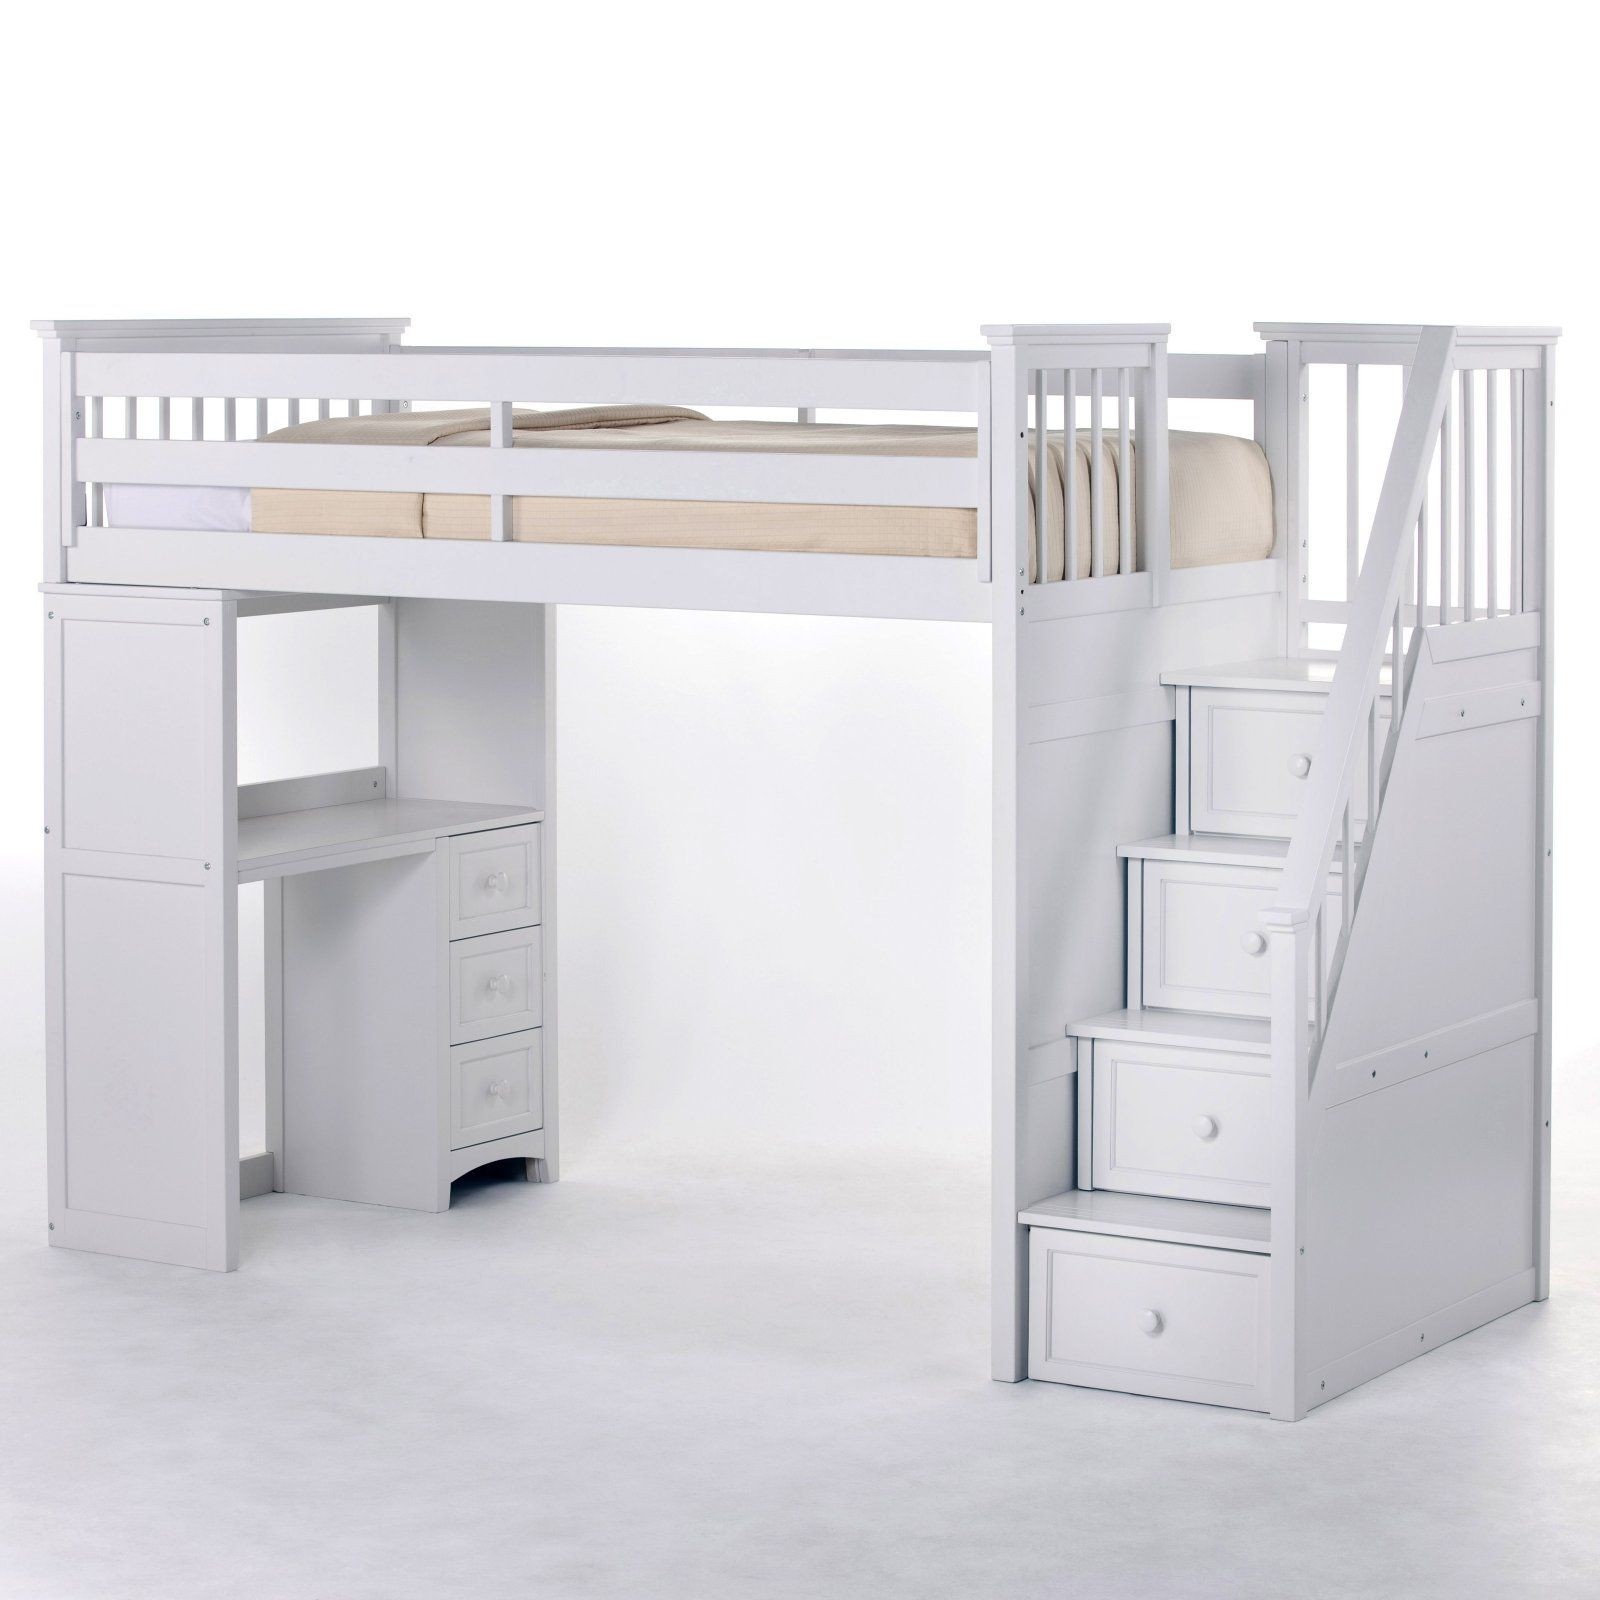 Schoolhouse stairway loft bed white loft beds at